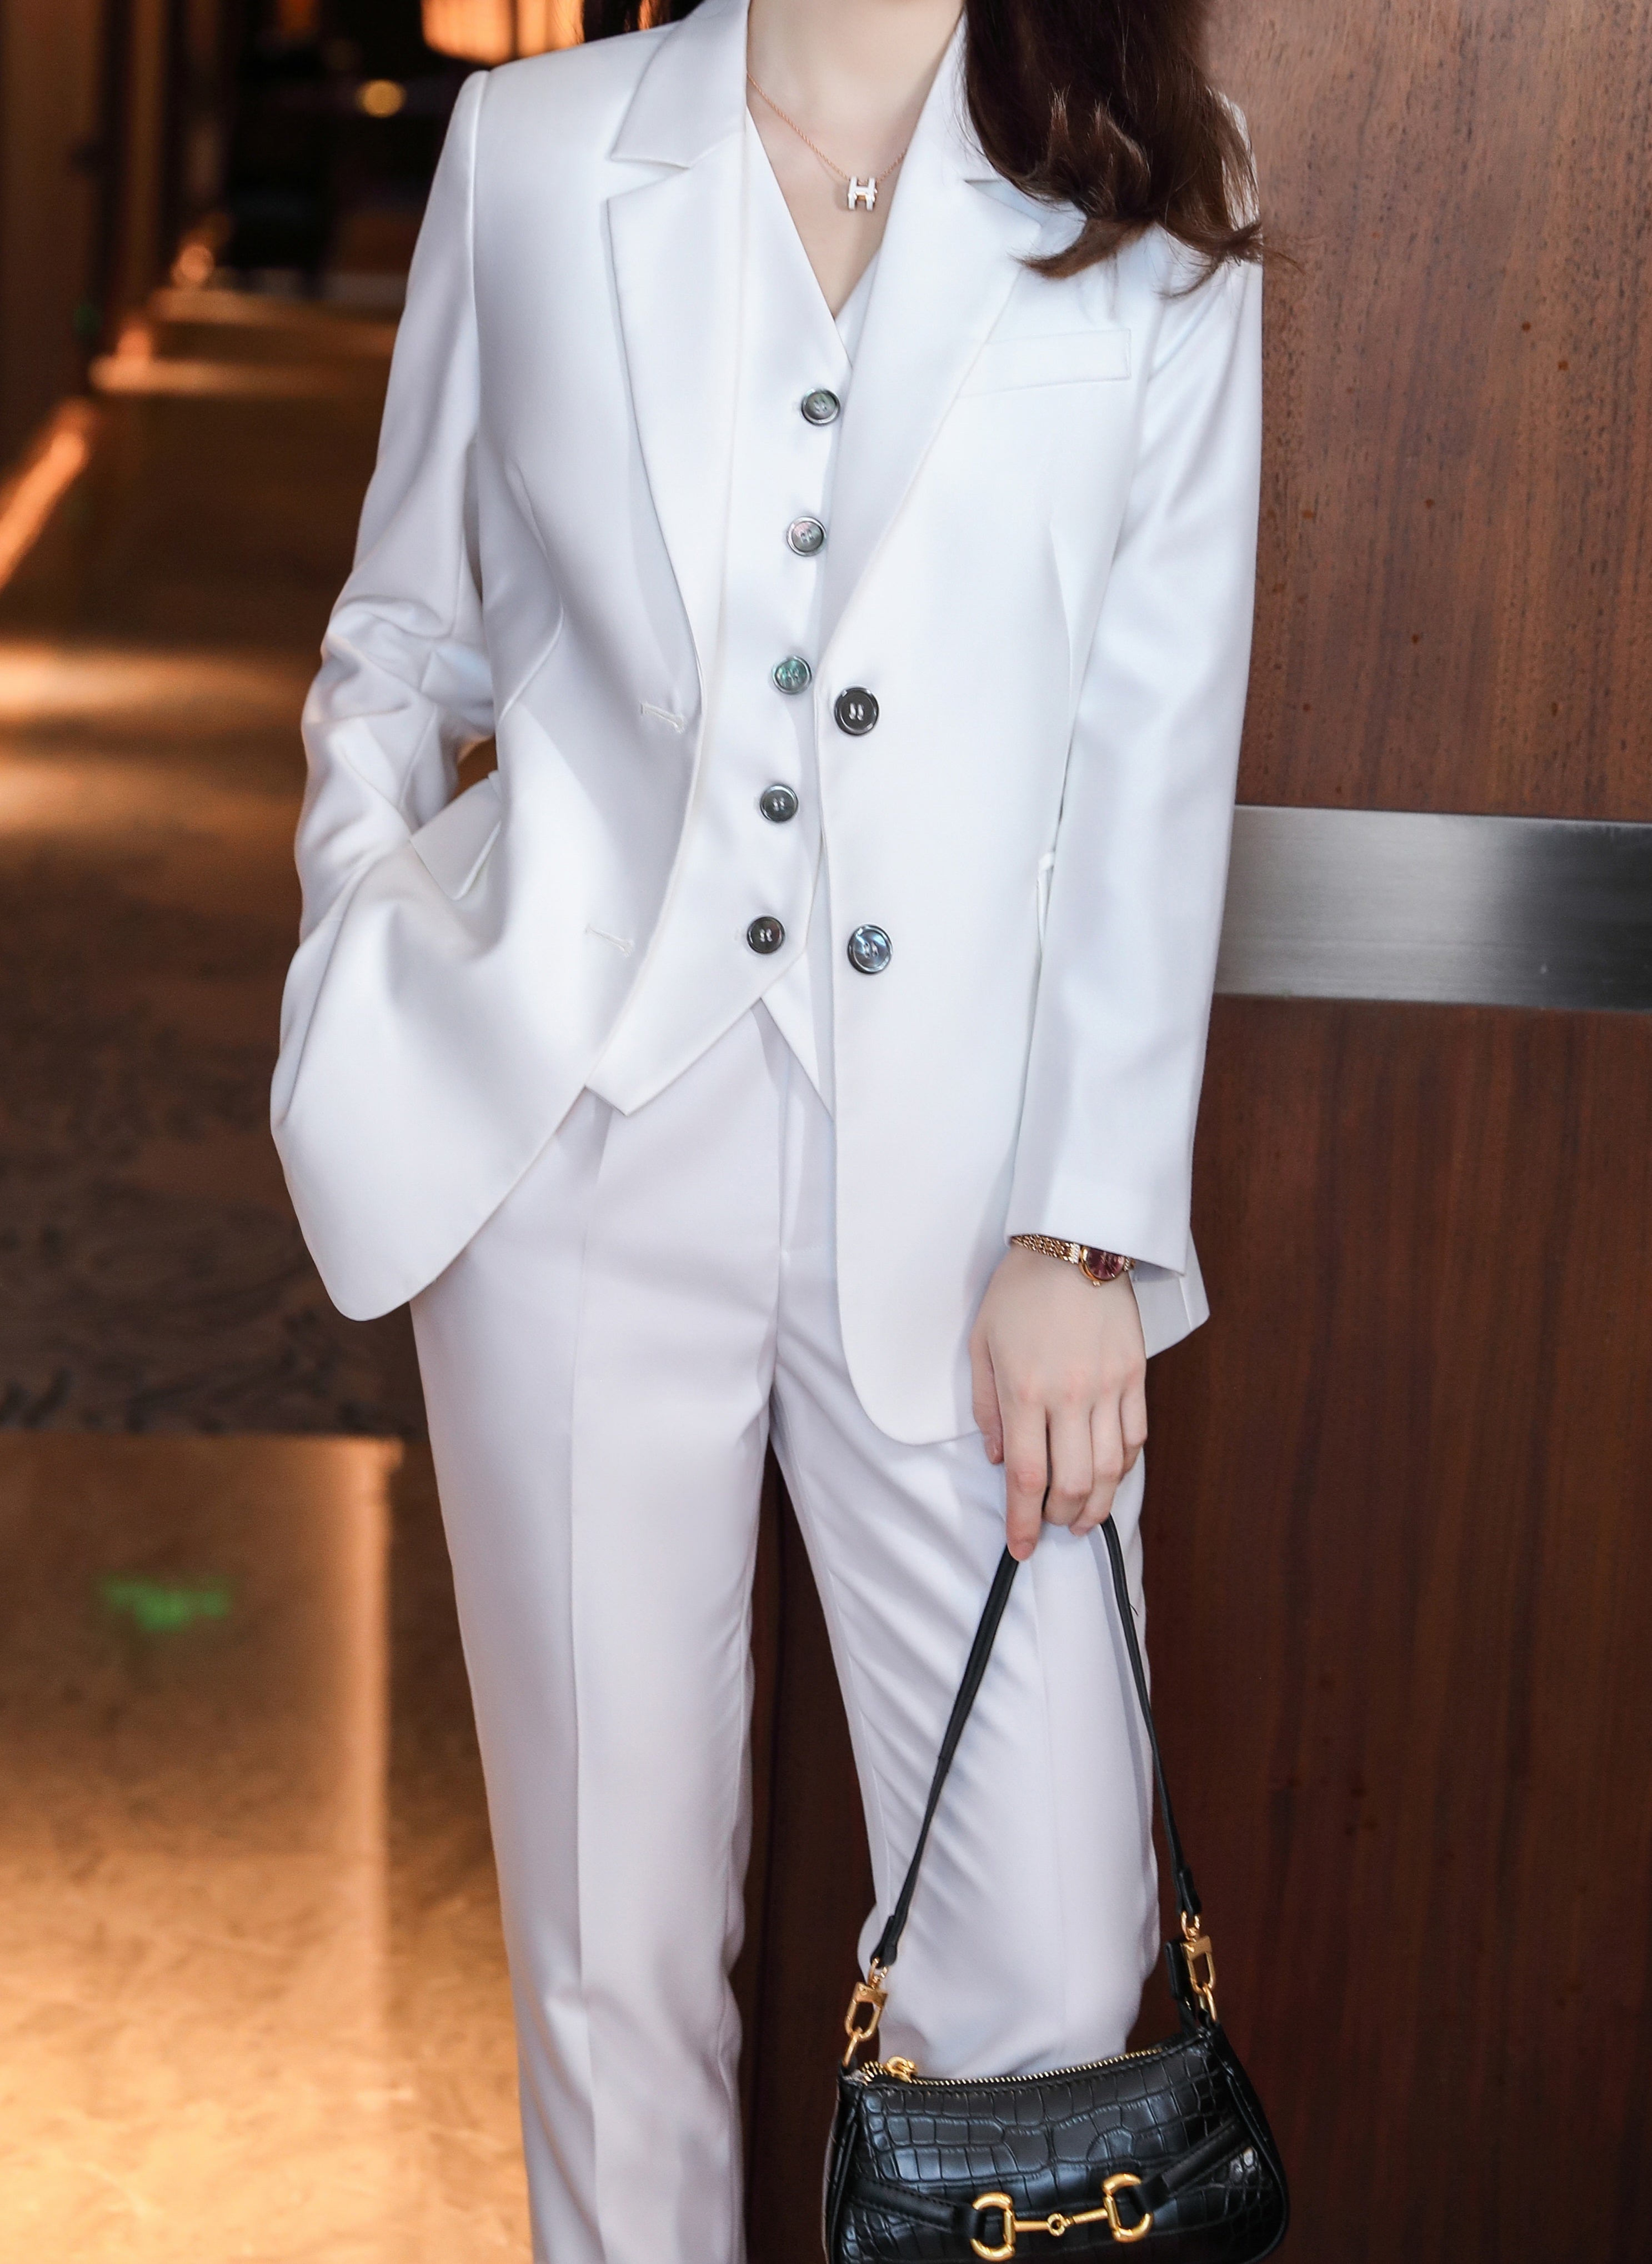 Cream white 3-piece satin suit, satin suits with blazer, waistcoat and pants